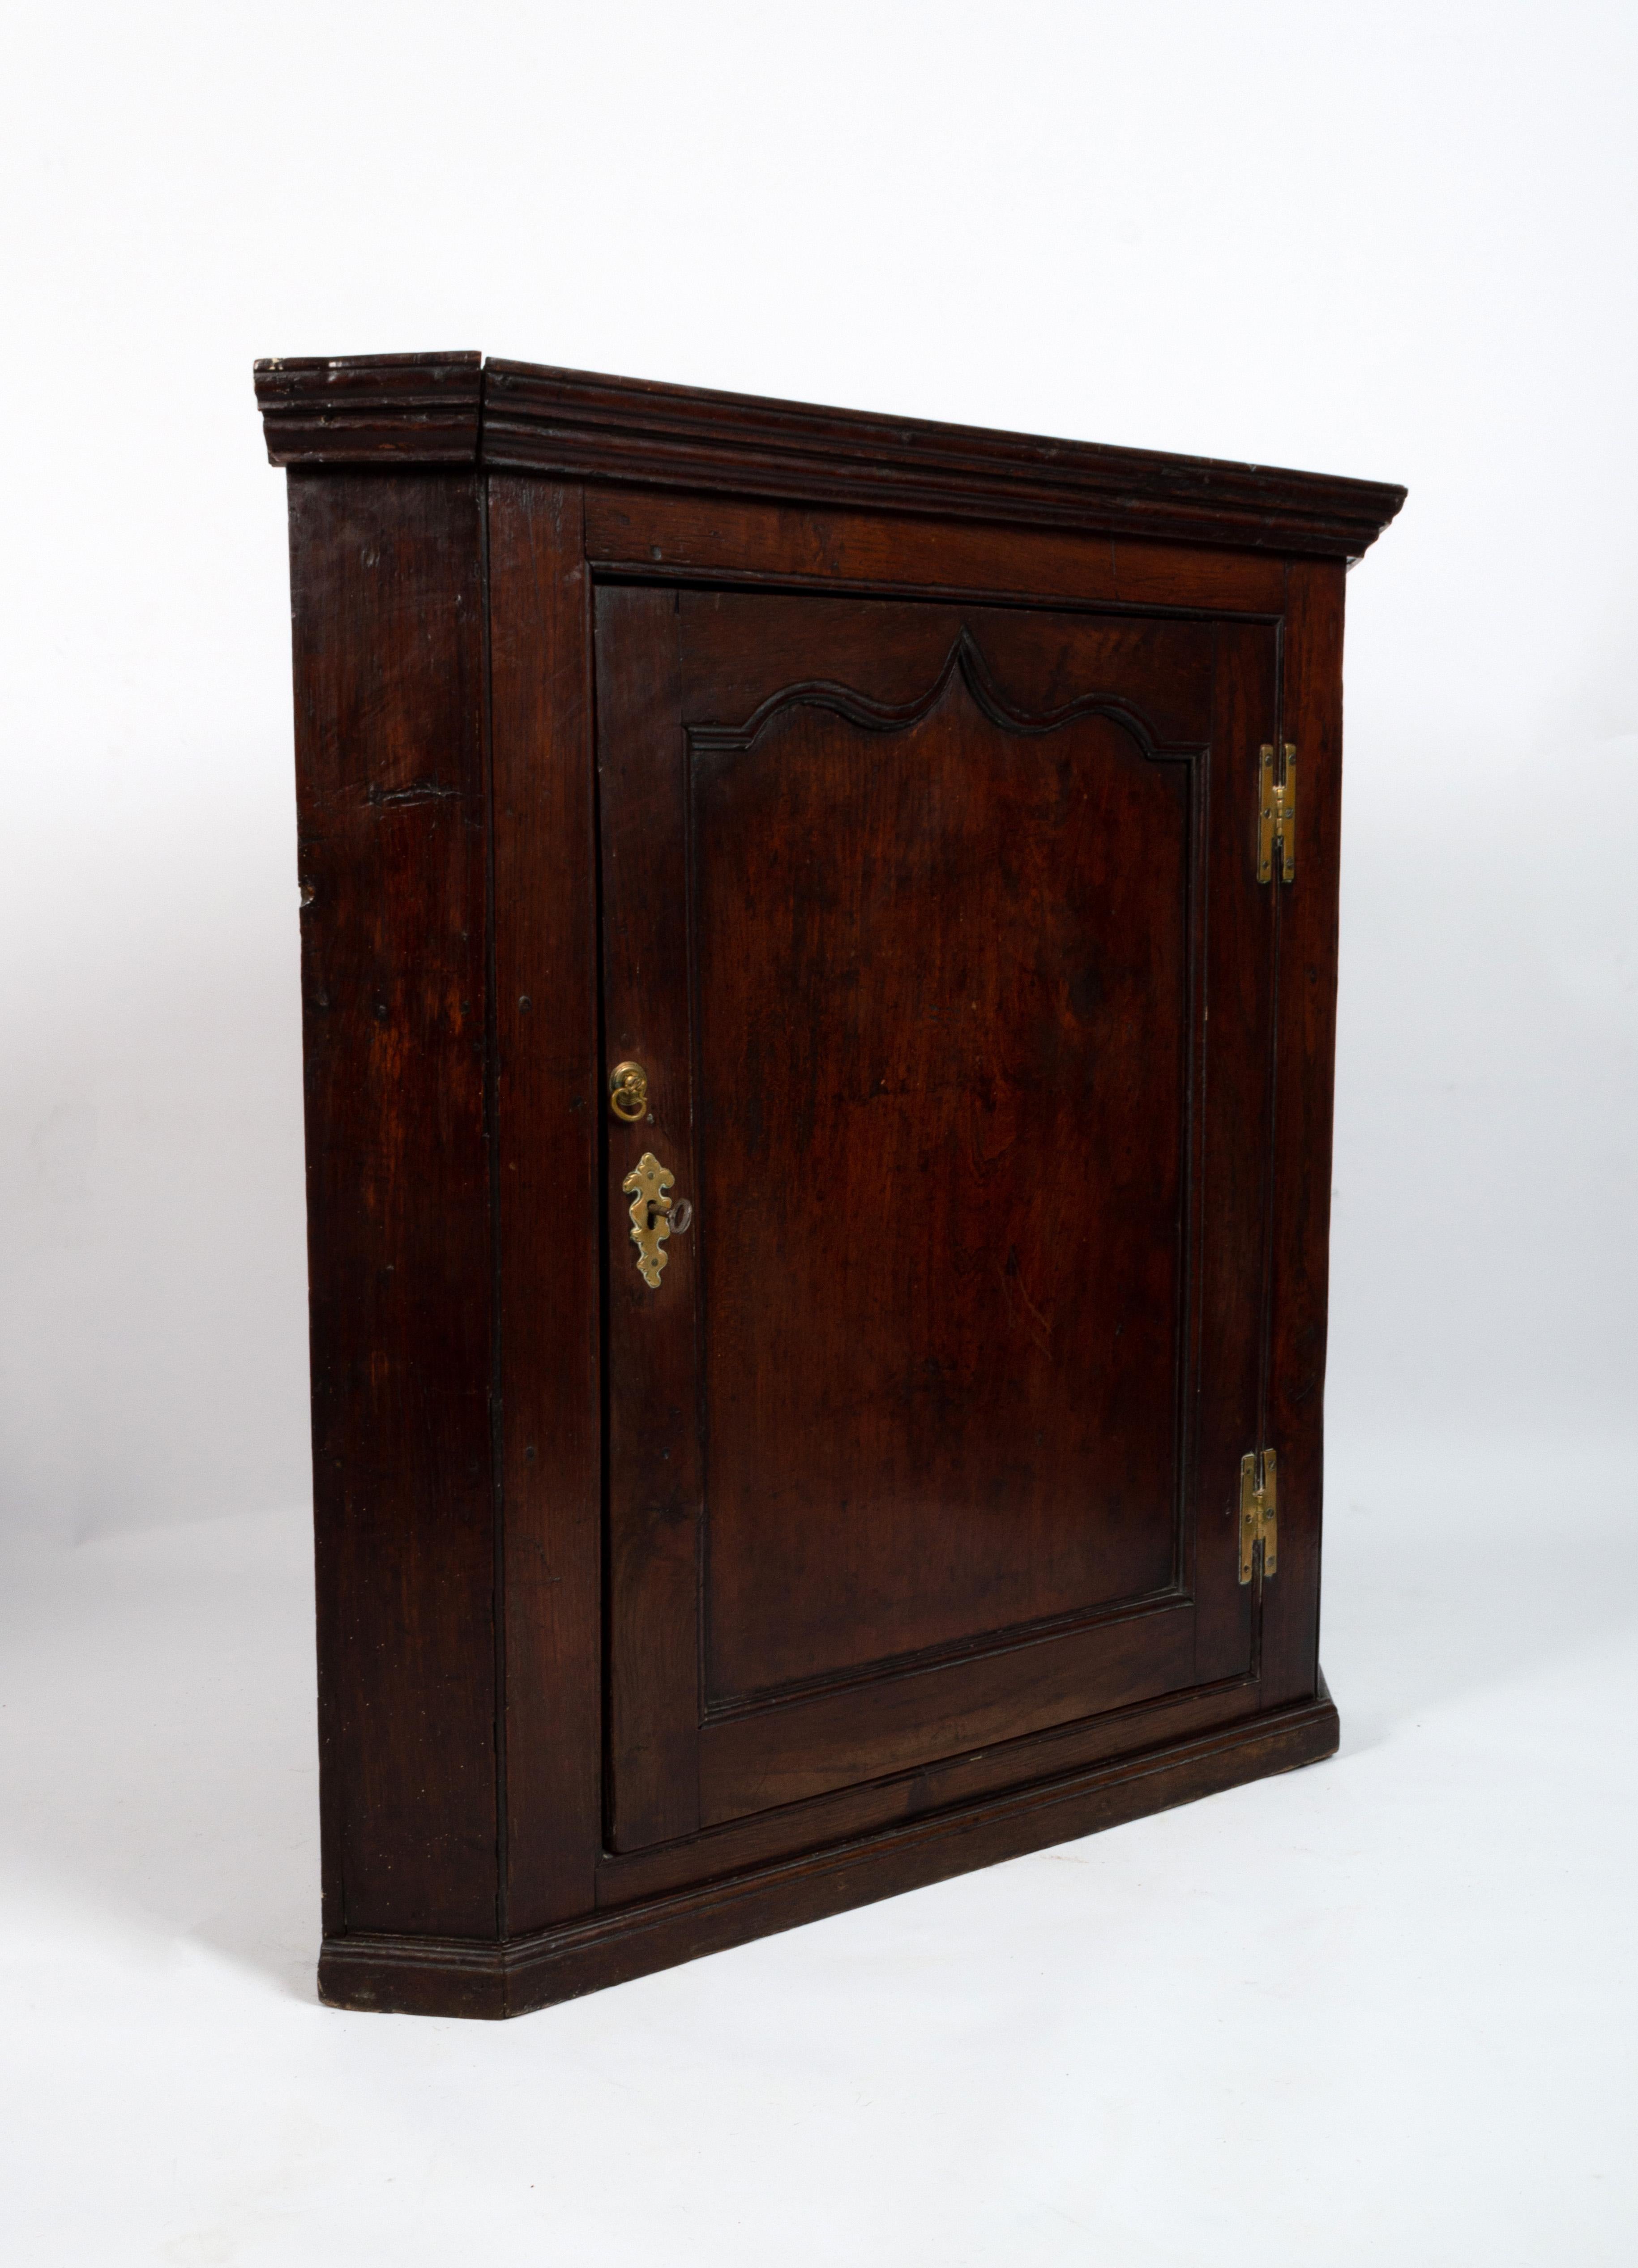 Antique English 18th century Georgian Oak corner cupboard.
George II
circa 1750.

A fine quality panelled oak hanging corner cupboard with brass H-hinges.
Good colour and patina. 
In excellent condition commensurate with age.